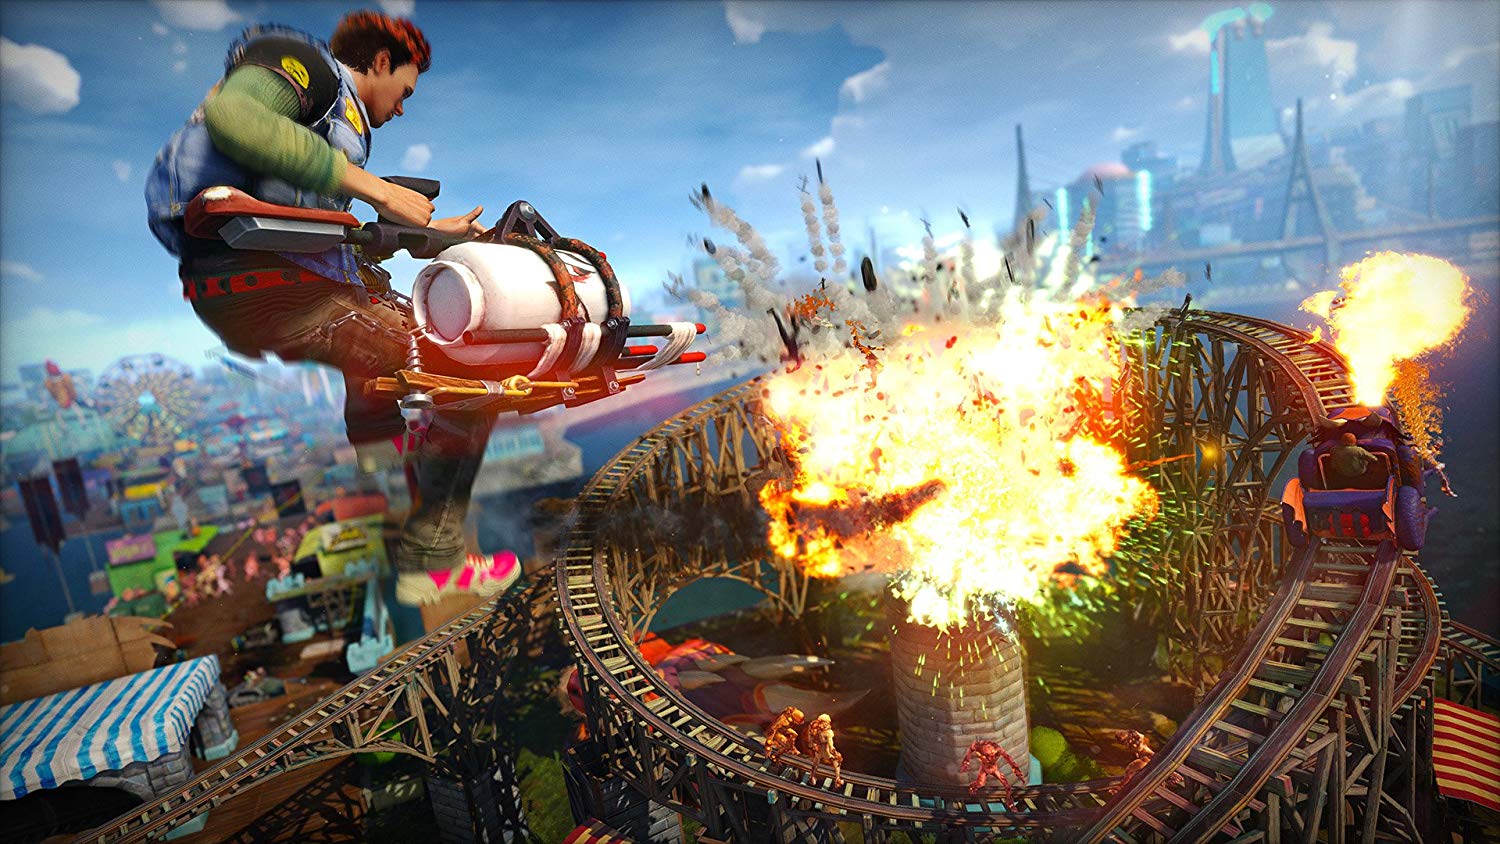 Download sunset overdrive for pc imdg code supplement pdf free download